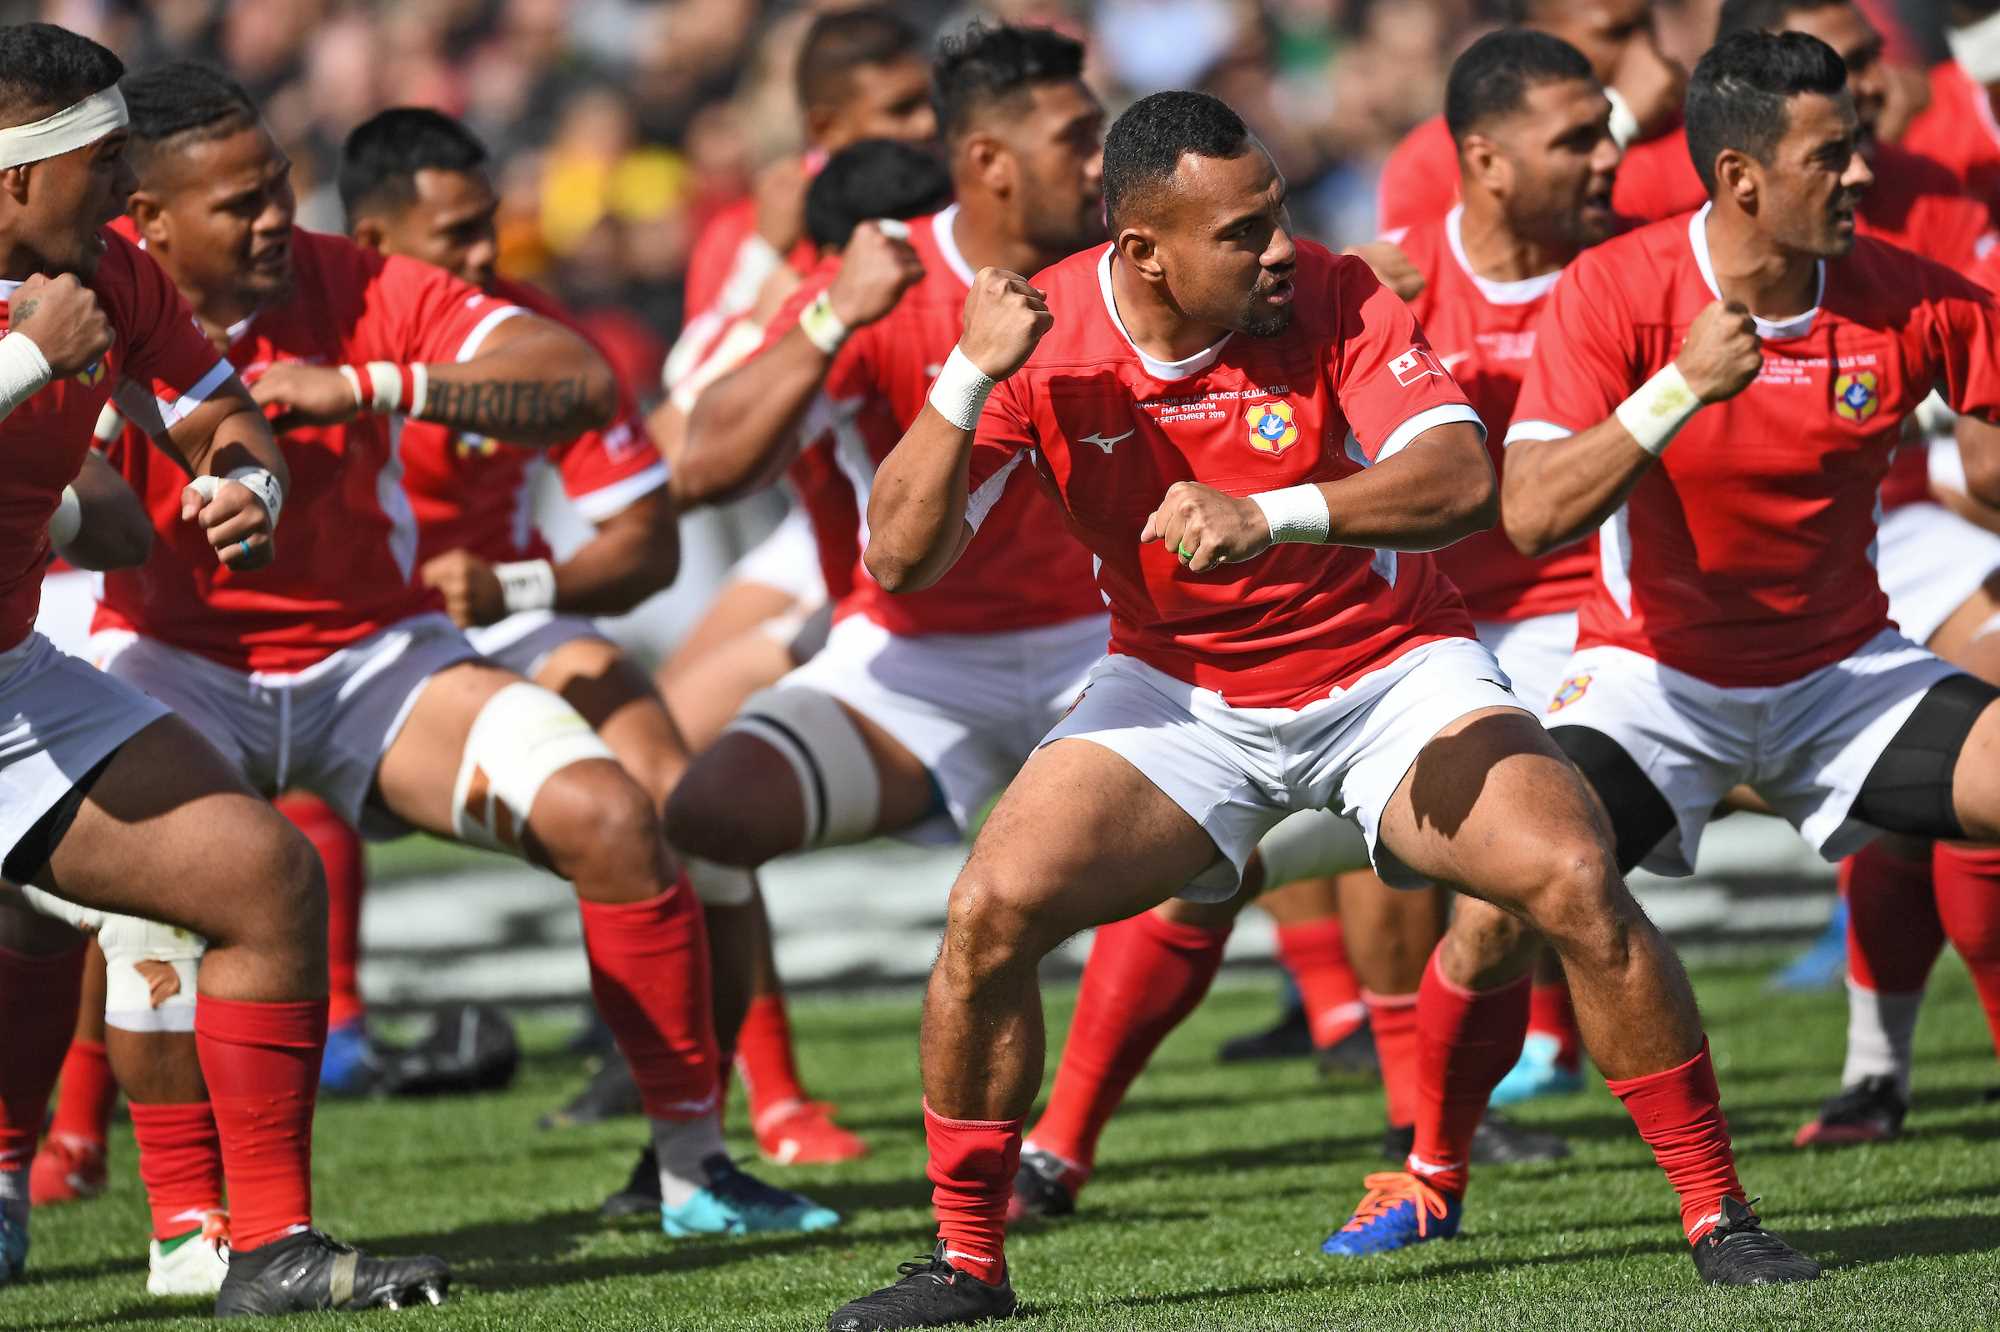 Three Auckland Rugby players named in Tonga squad